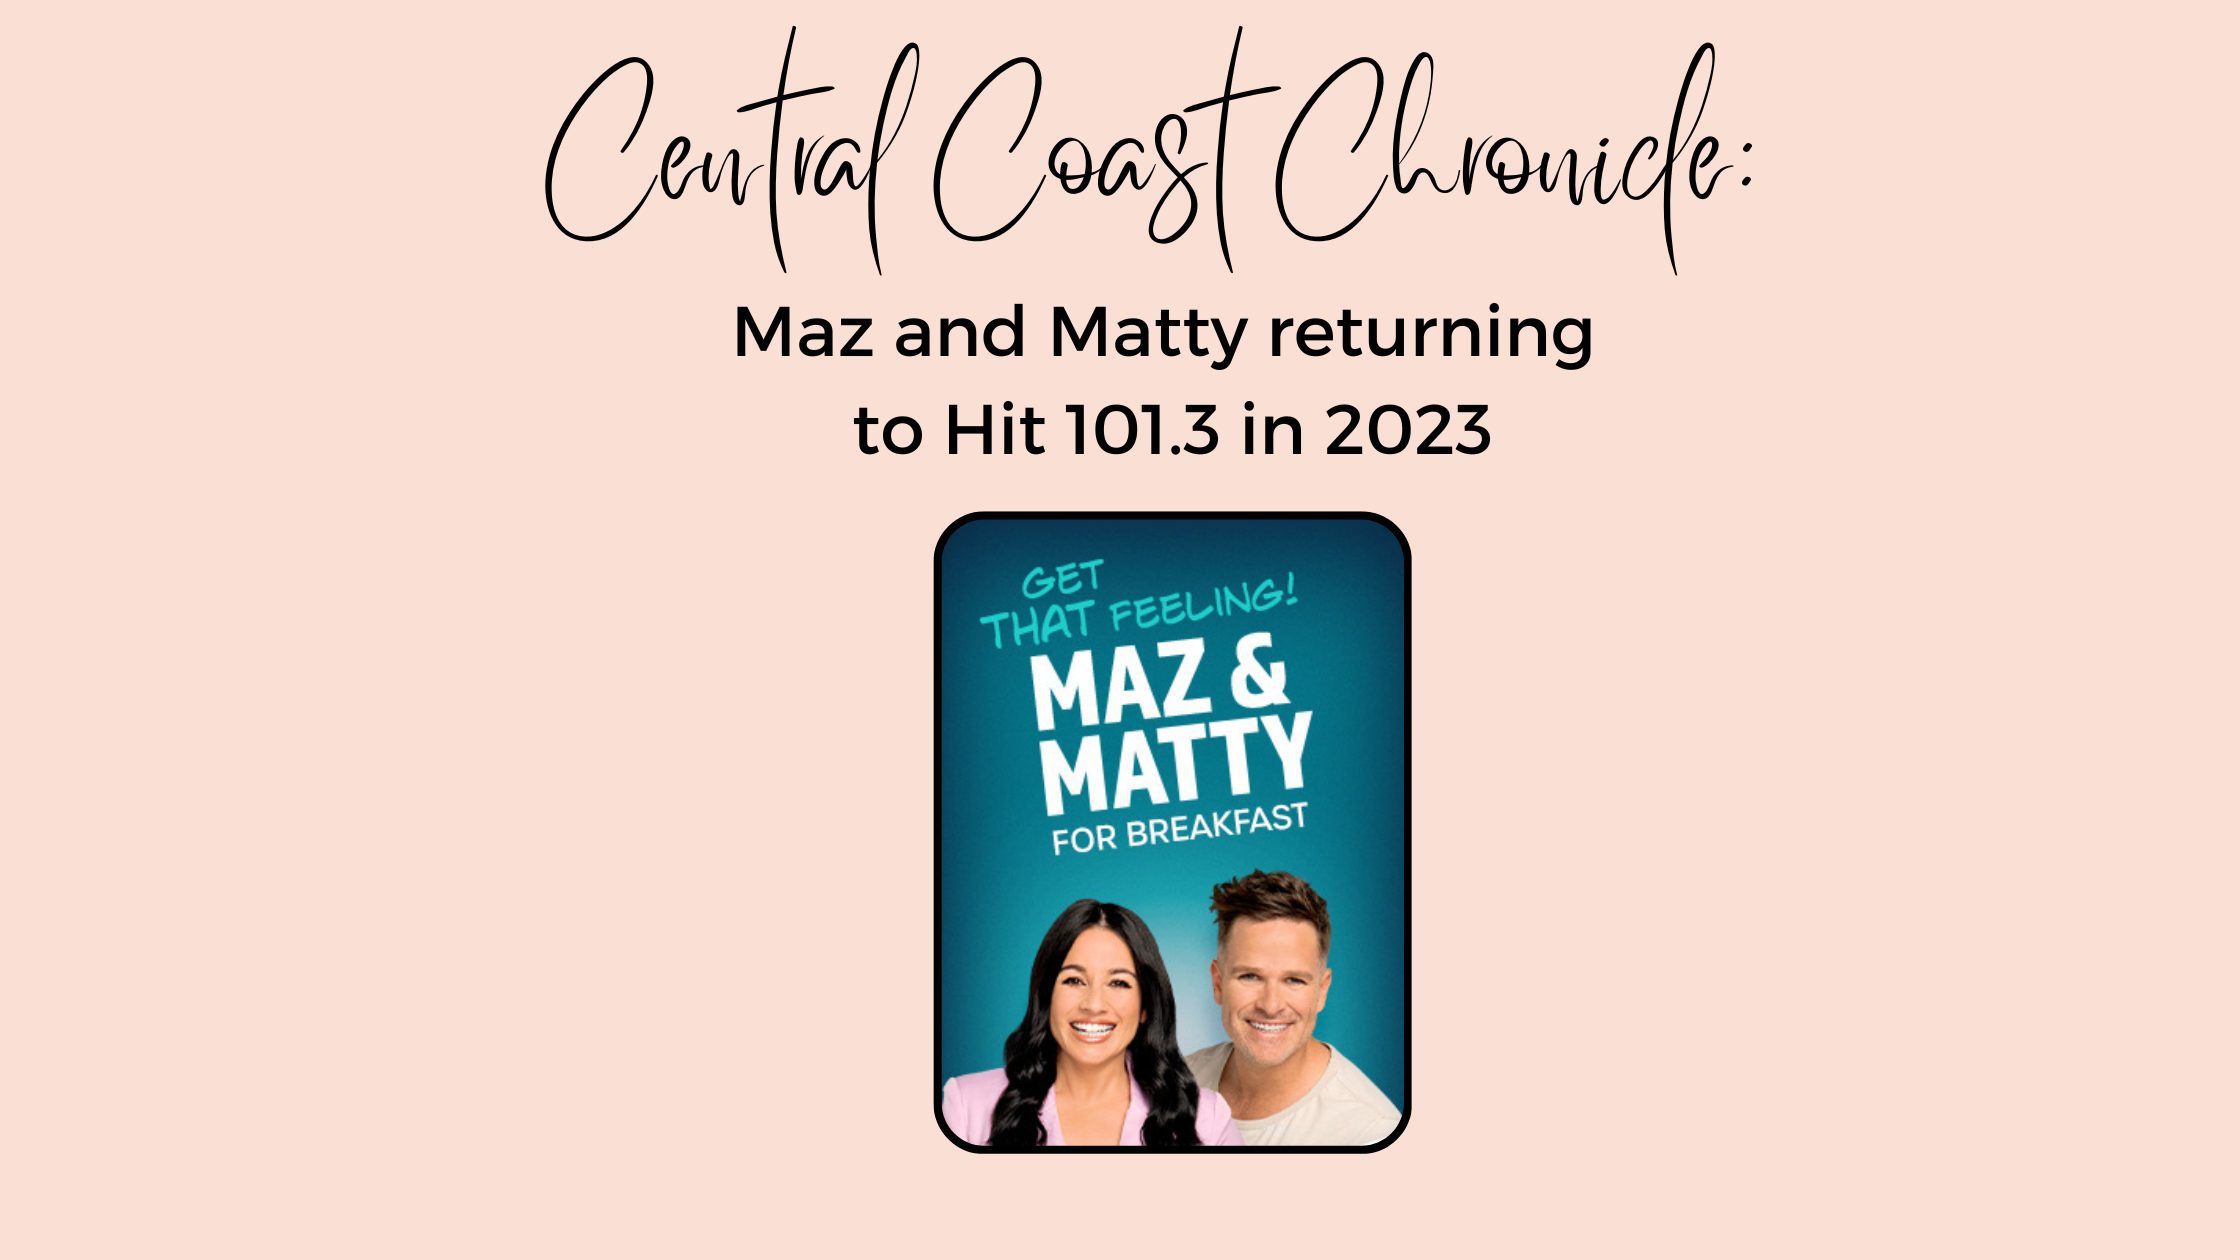 Maz and Matty returning to Hit 101.3 in 2023